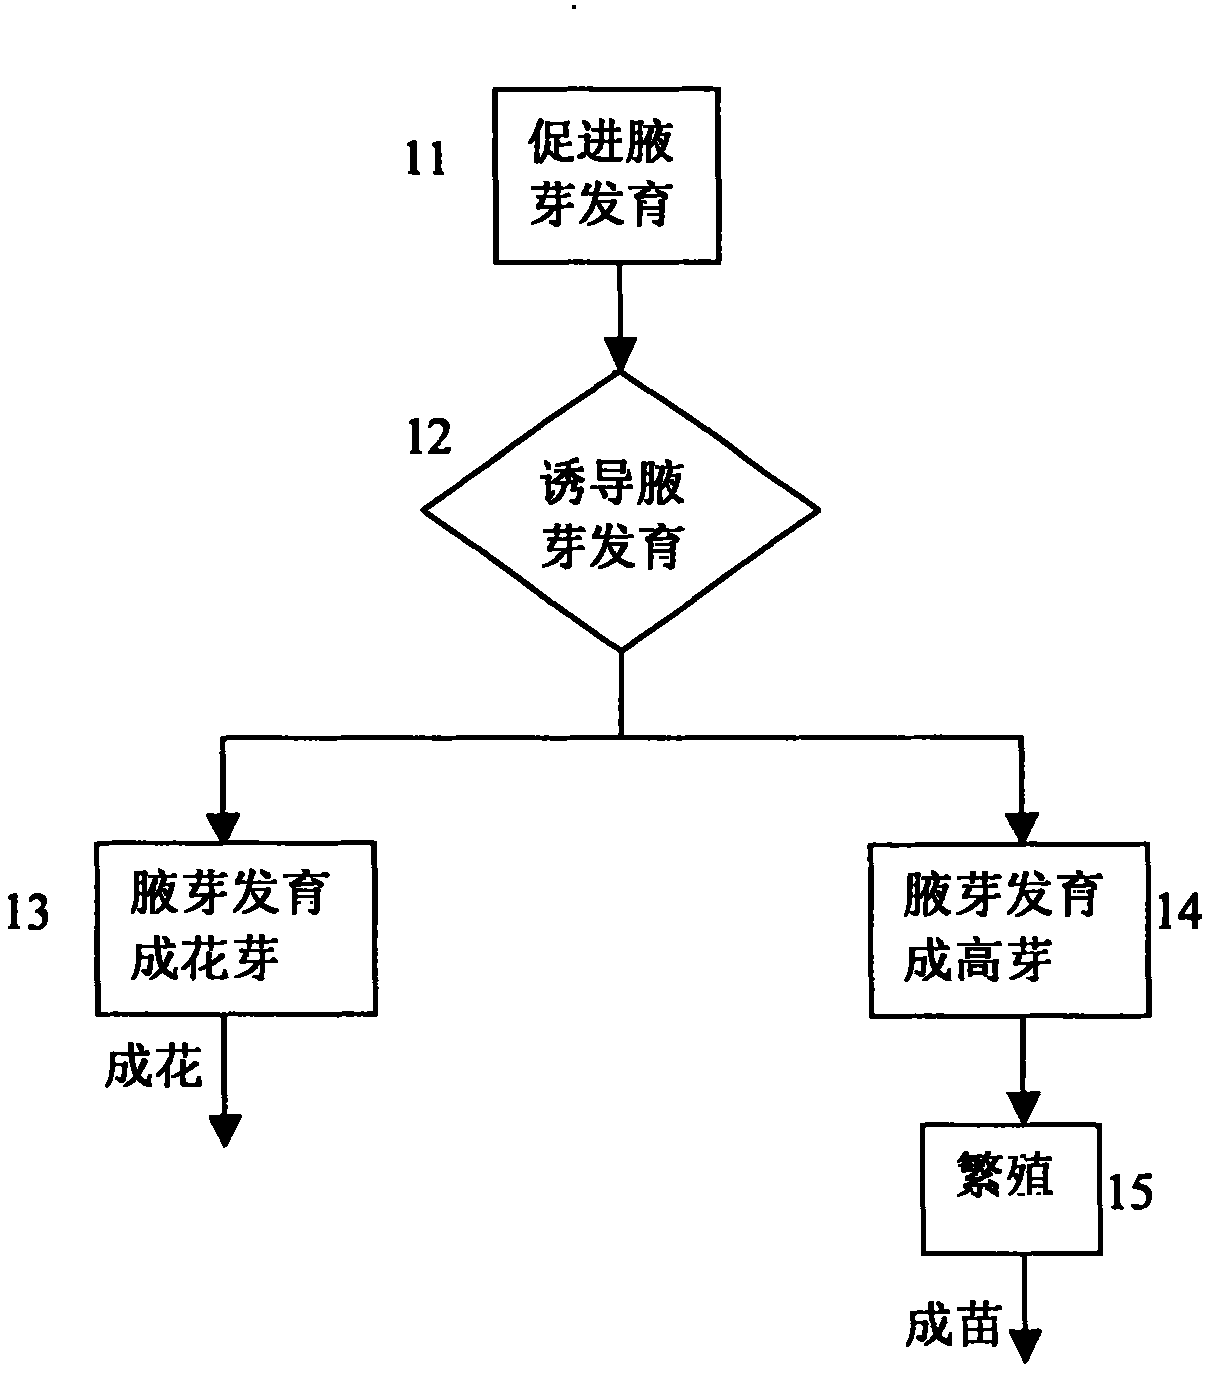 Method for controlling flowering and propagation of dendrobium nobile